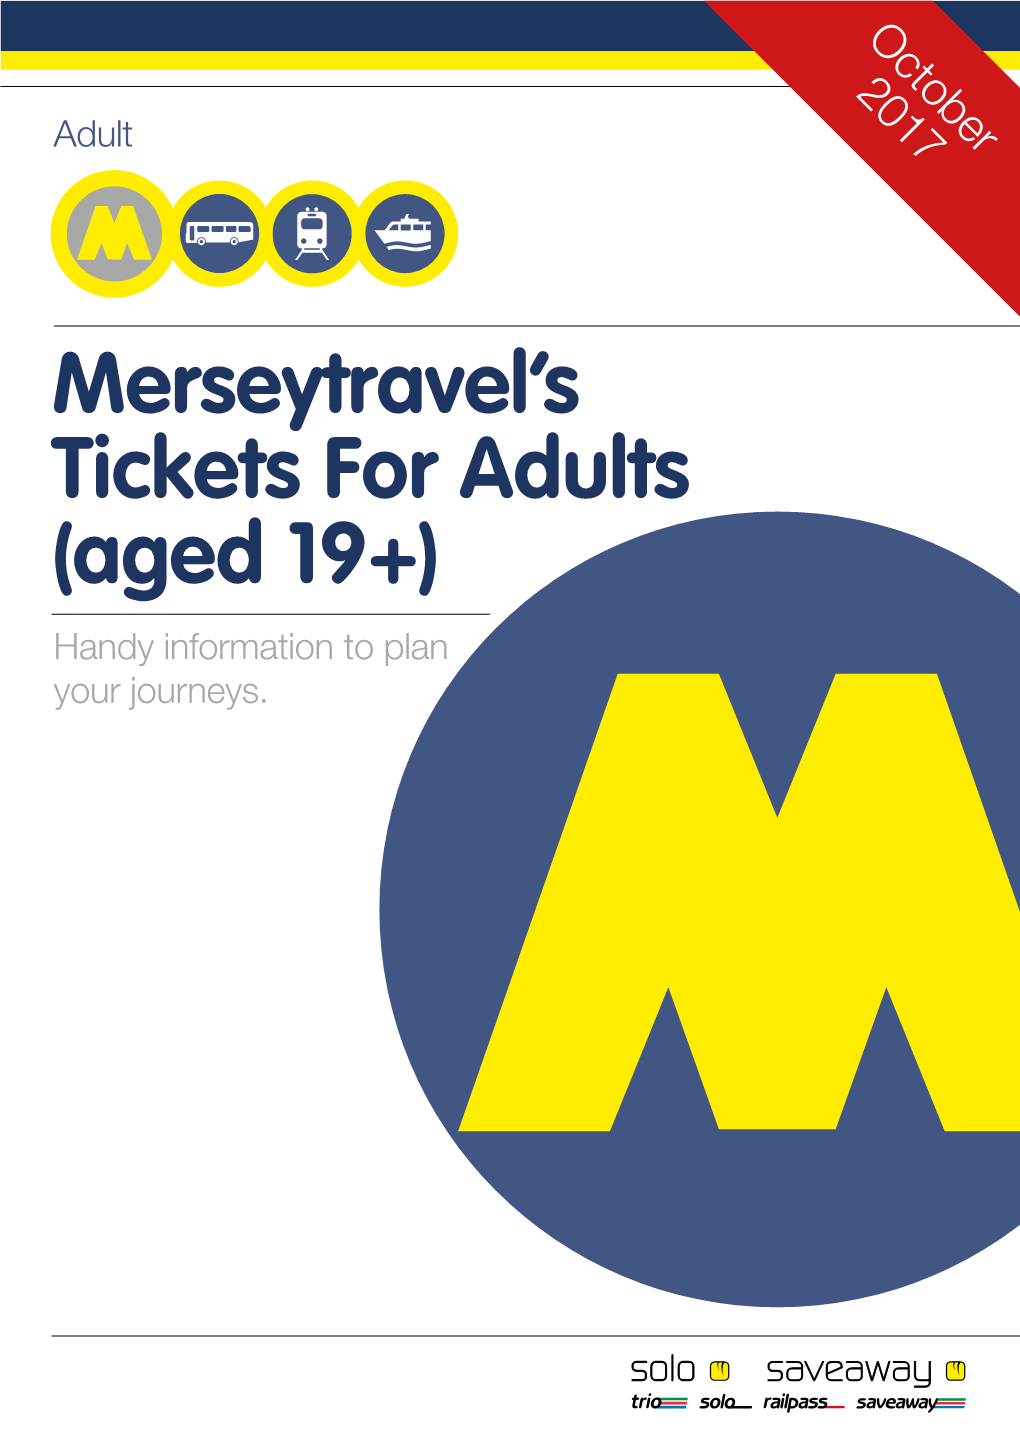 Merseytravel's Tickets for Adults (Aged 19+)